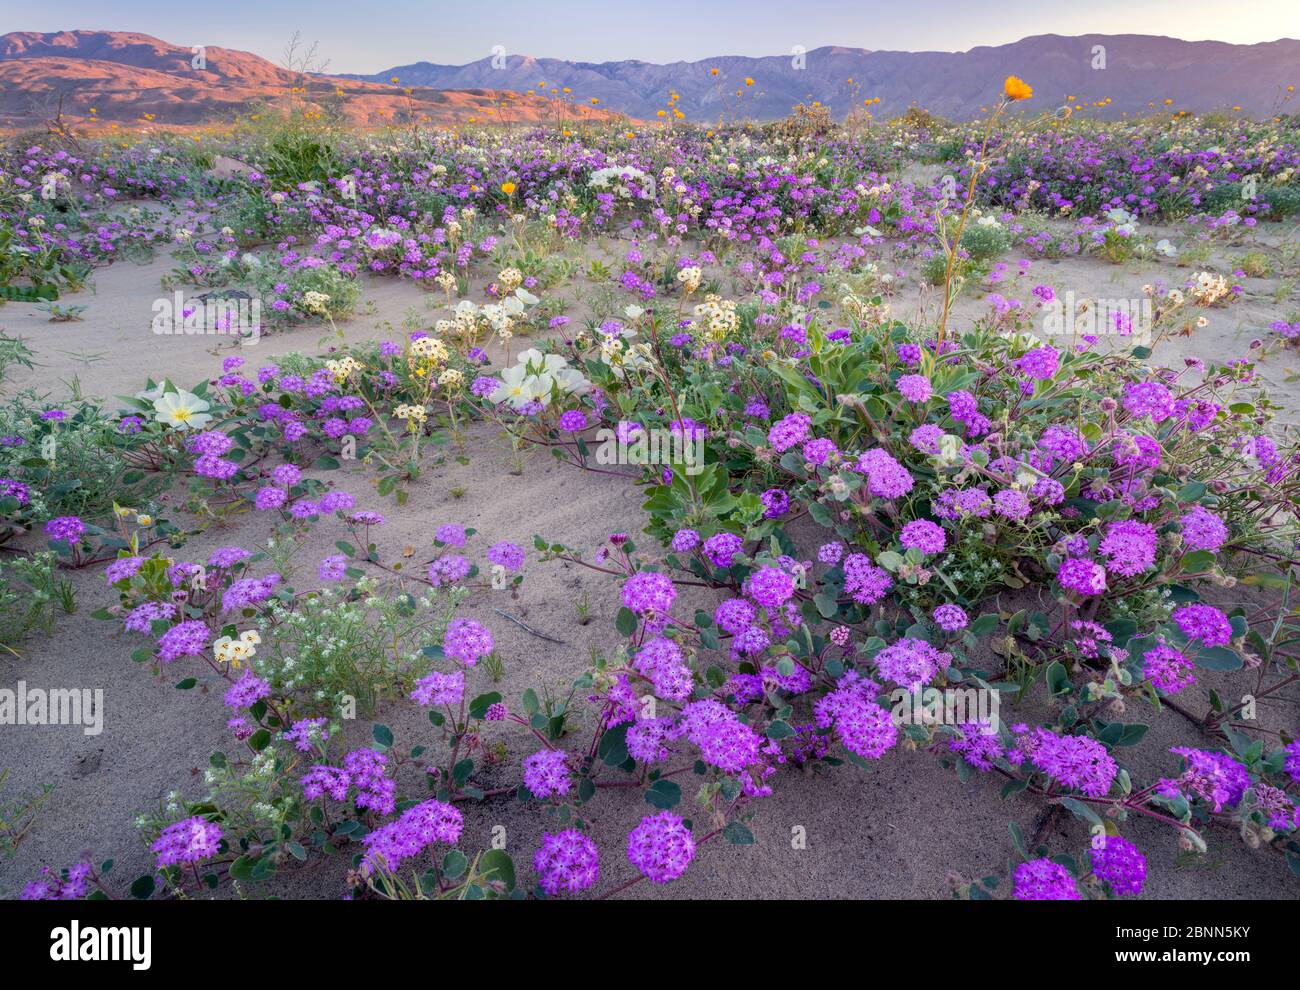 Desert landscape with flowering Sand verbena (Abronia), Desert gold (Geraea canescens), and Birdcage evening primrose (Oenothera deltoides), with the Stock Photo